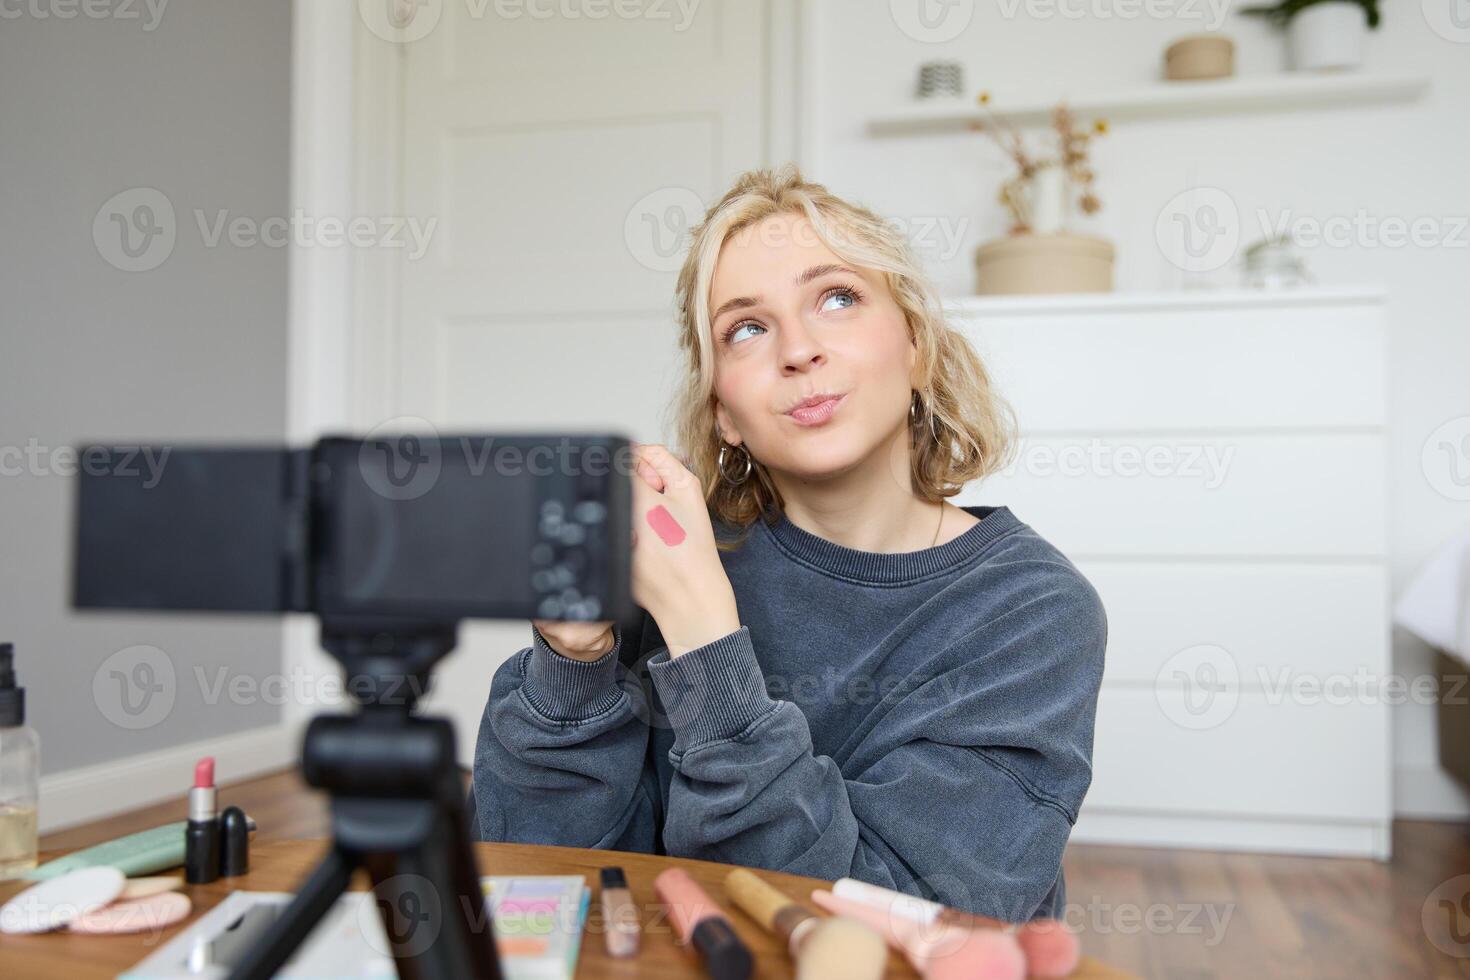 Portrait of young creative social media content creator, woman showing lipstick swatches on her hand, recording about beauty and makeup, sitting in her room in front of digital camera photo